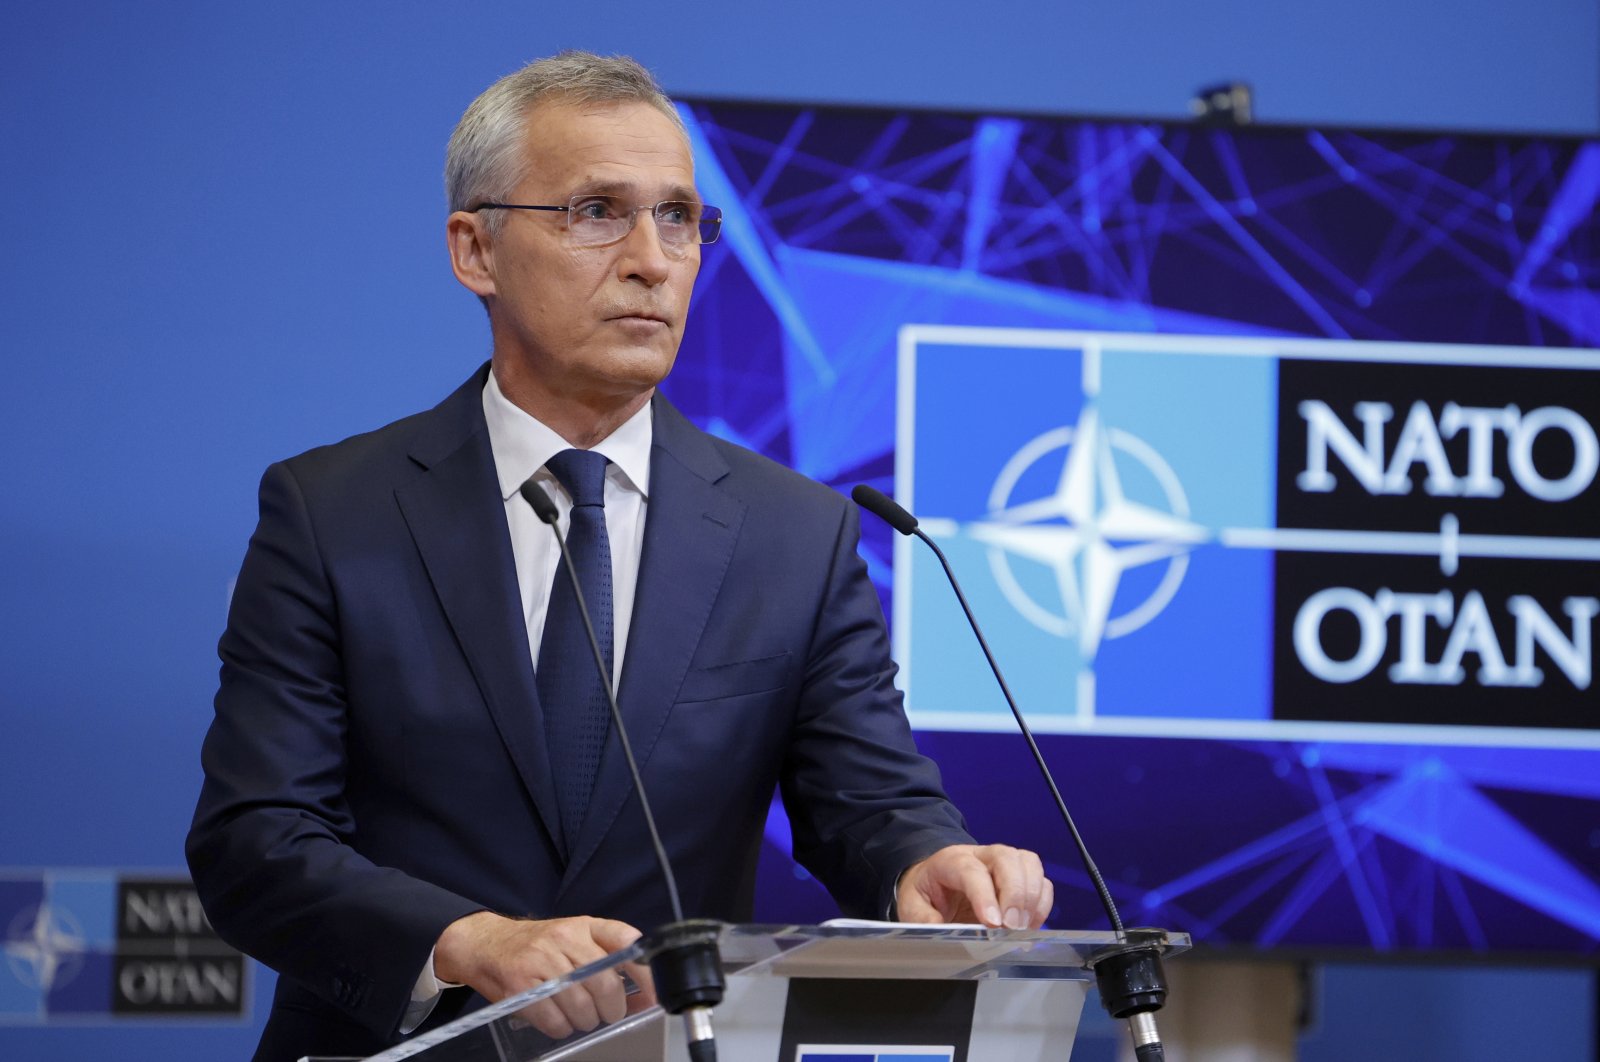 NATO Secretary-General Jens Stoltenberg speaks during a media conference after a meeting of NATO defense ministers at NATO headquarters in Brussels, Belgium, June 16, 2022. (AP Photo)